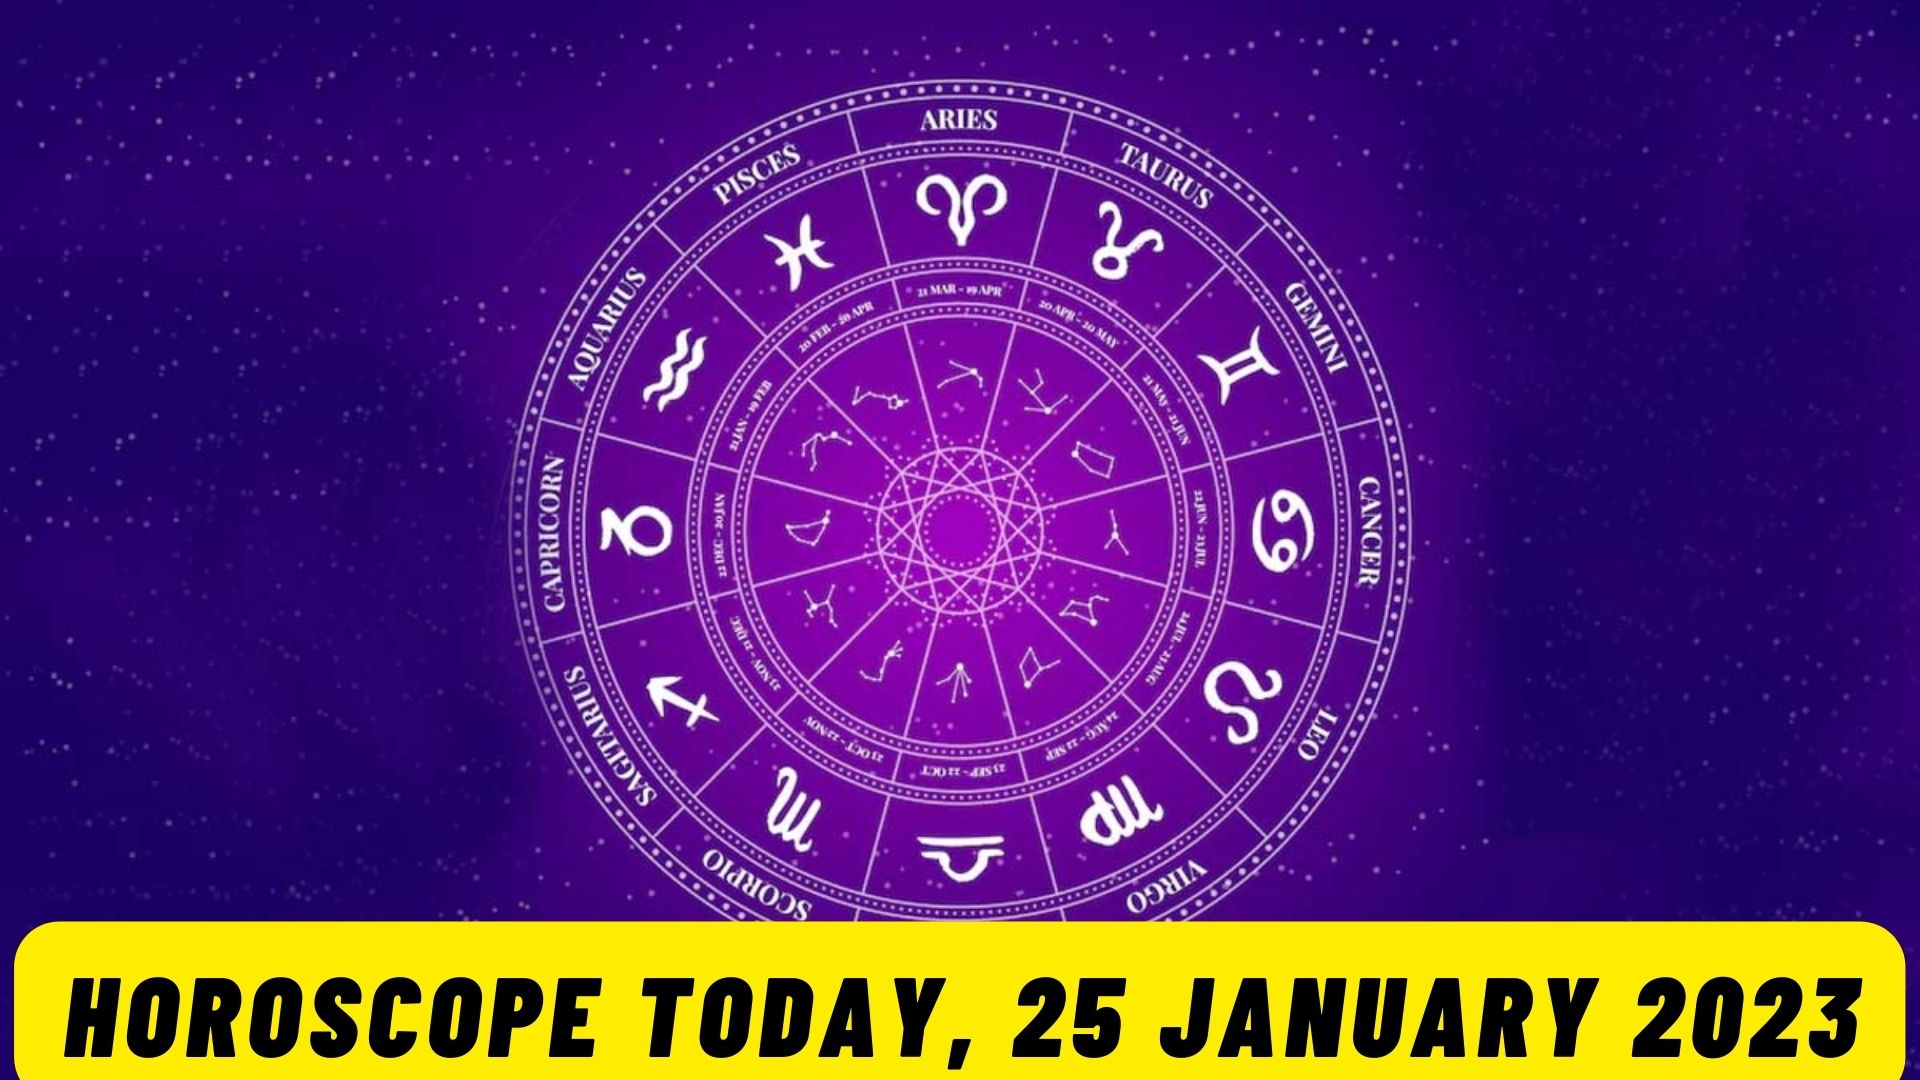 Horoscope Today, 25 January 2023 - Check Here Astrological Prediction For All Sun Signs